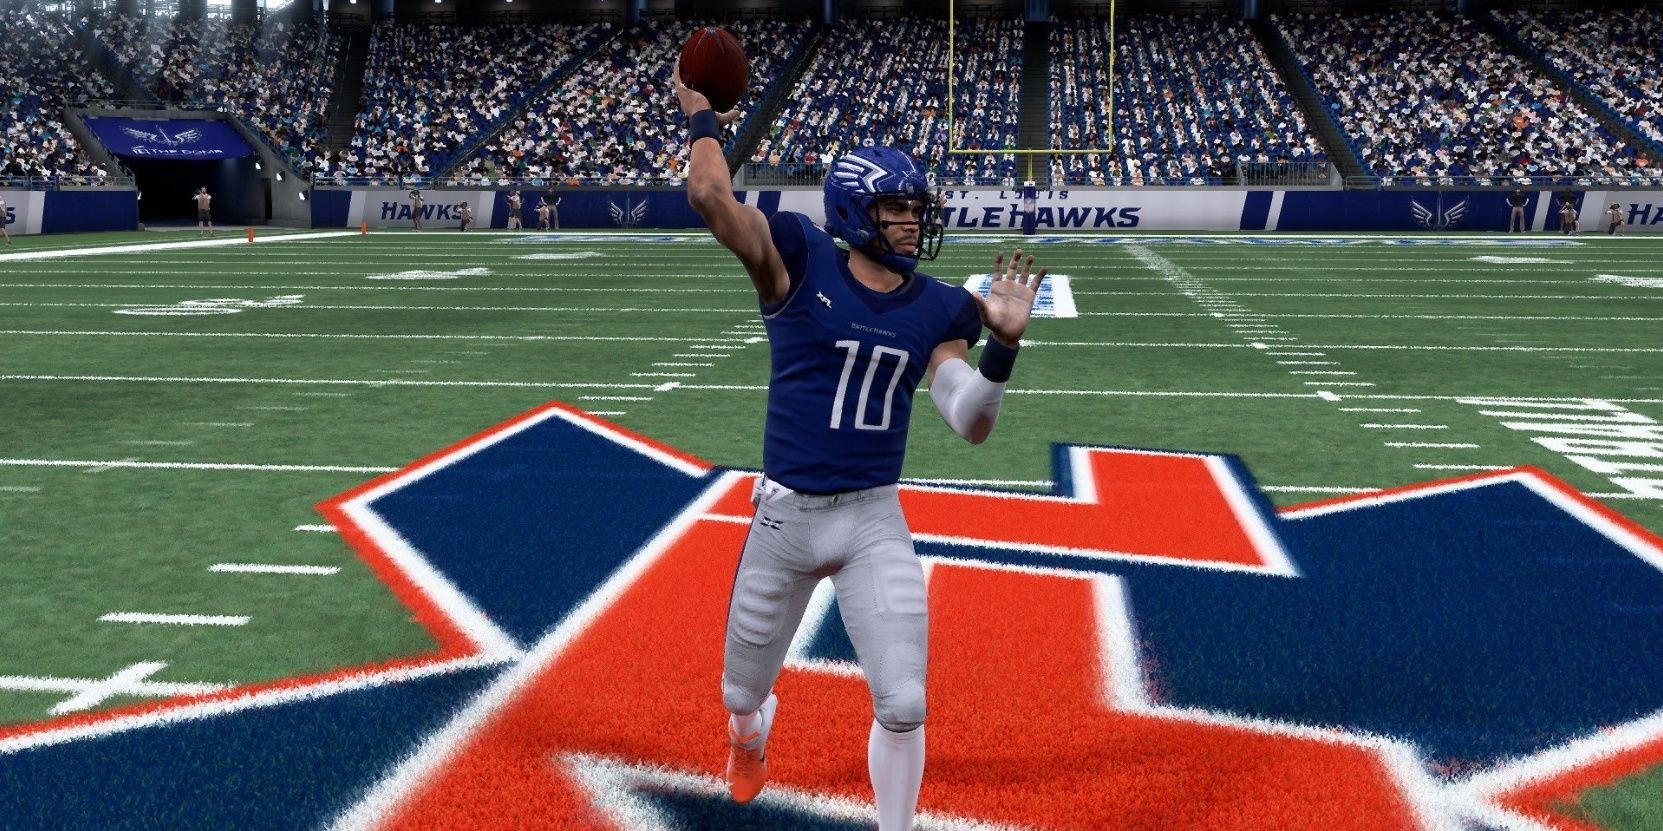 The XFL mod in Madden NFL 20